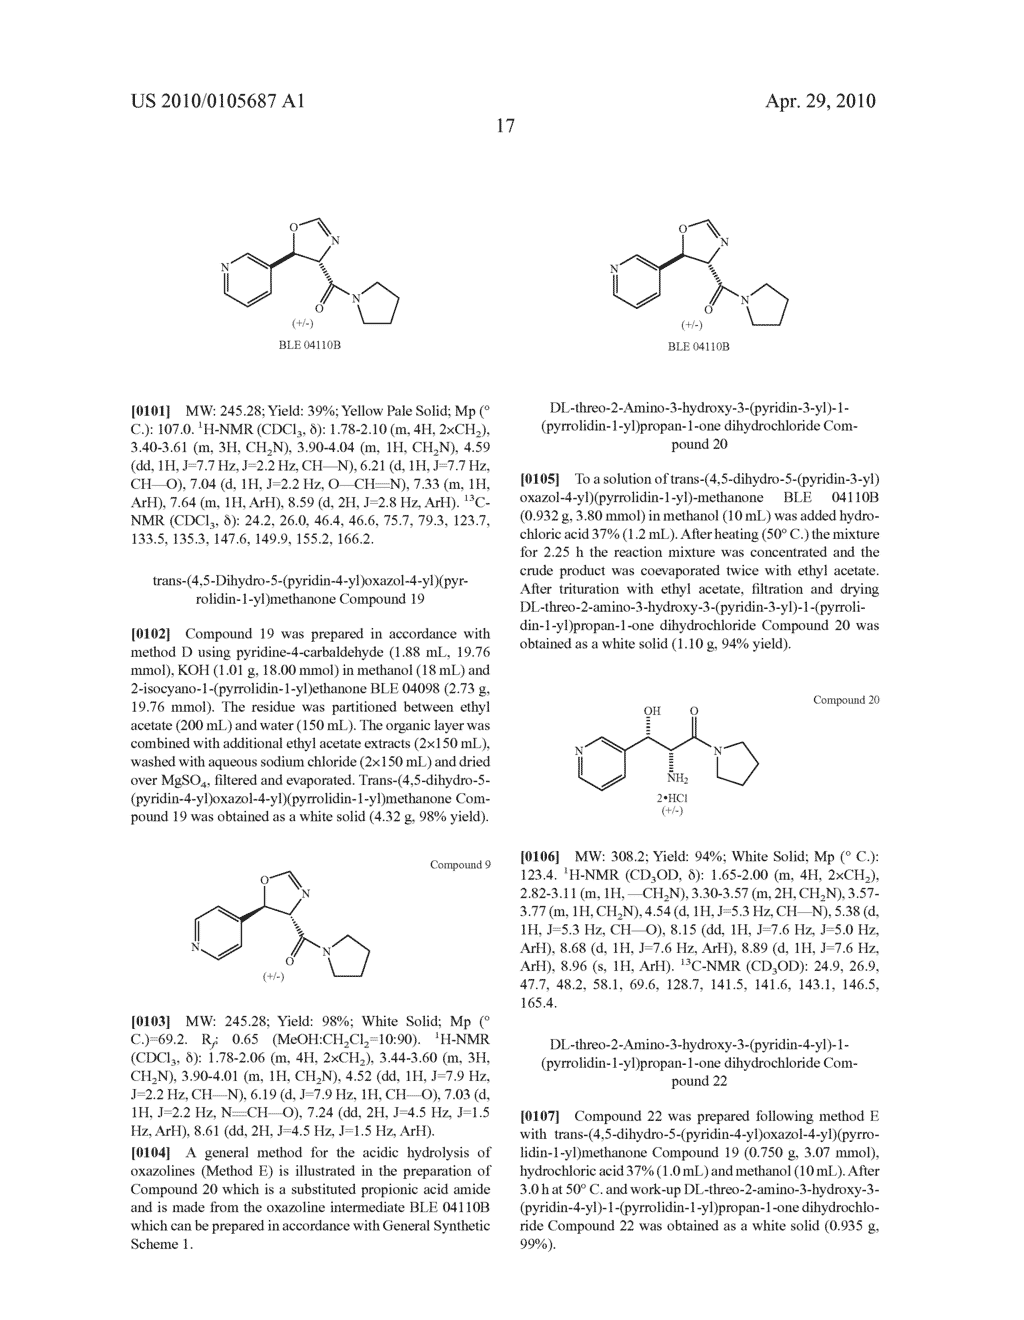 METHODS FOR TREATING COGNITIVE DISORDERS USING 1-ARYL-1-HYDROXY-2,3-DIAMINO-PROPYL AMINES, 1-HETEROARYL-1-HYDROXY-2,3-DIAMINO-PROPYL AMINES AND RELATED COMPOUNDS - diagram, schematic, and image 18